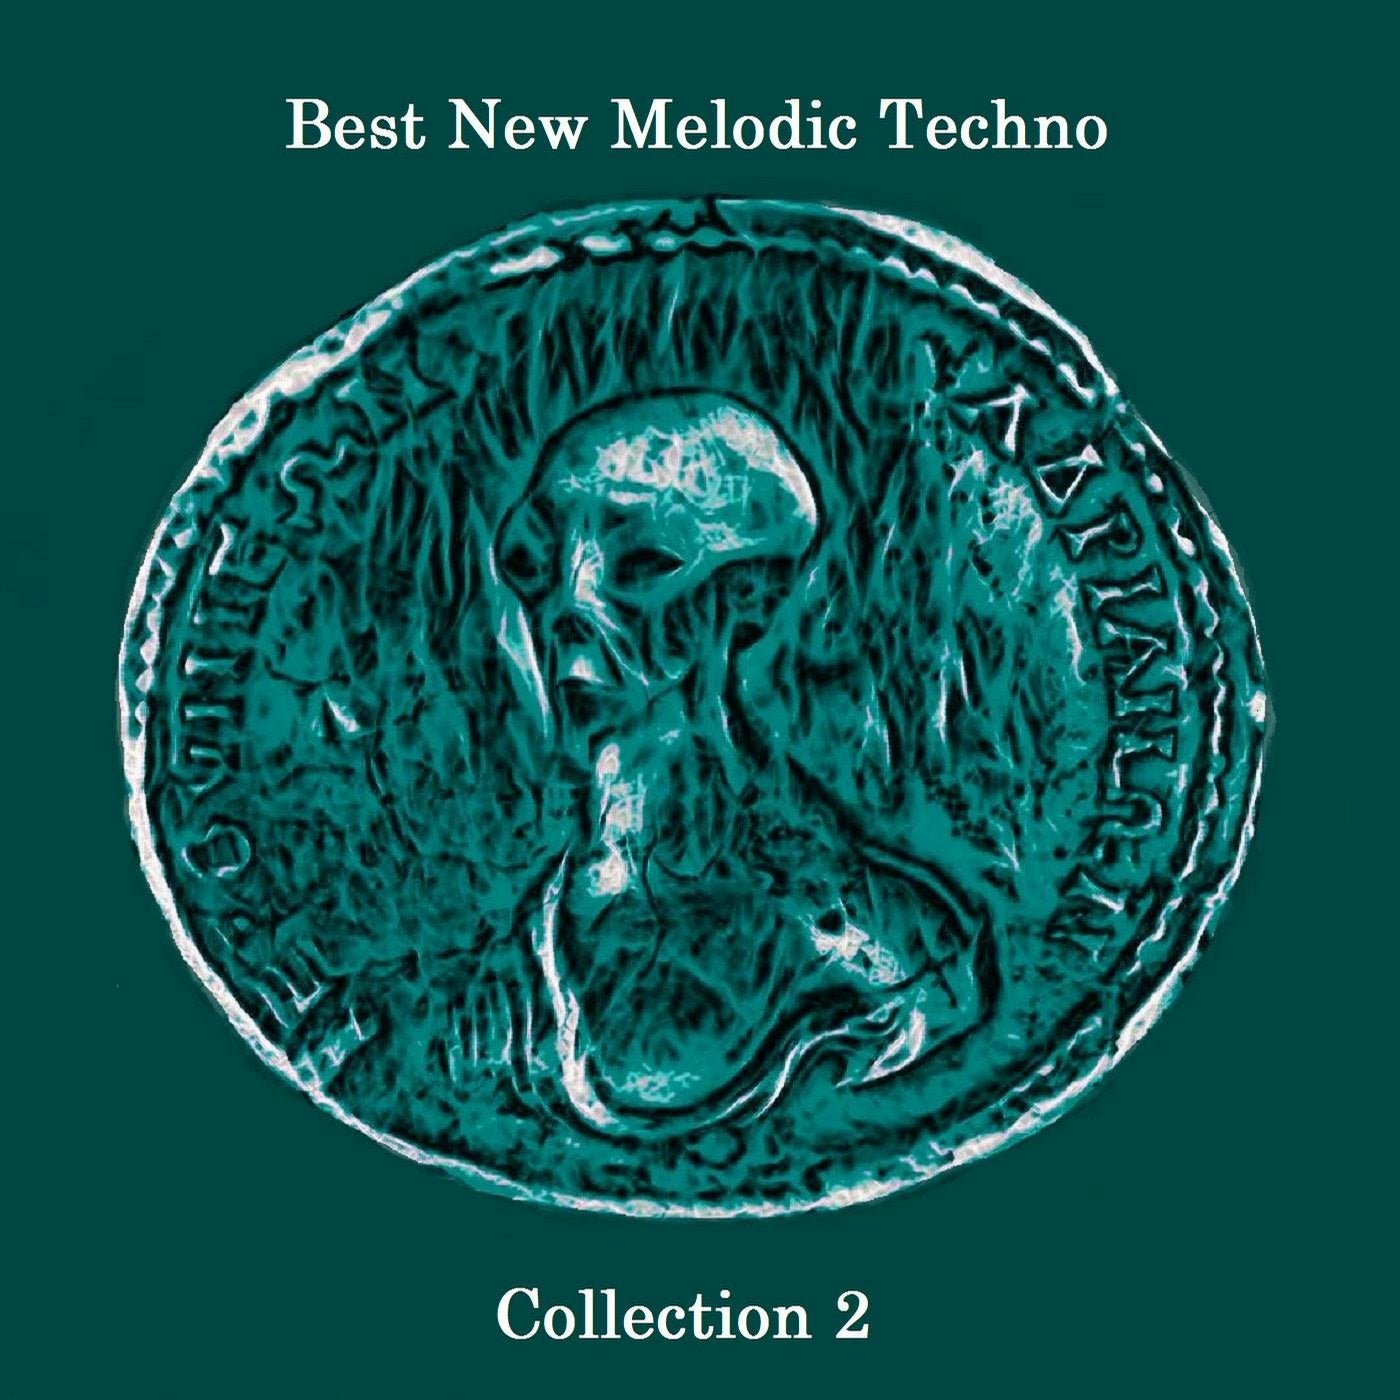 Best New Melodic Techno Collection 2